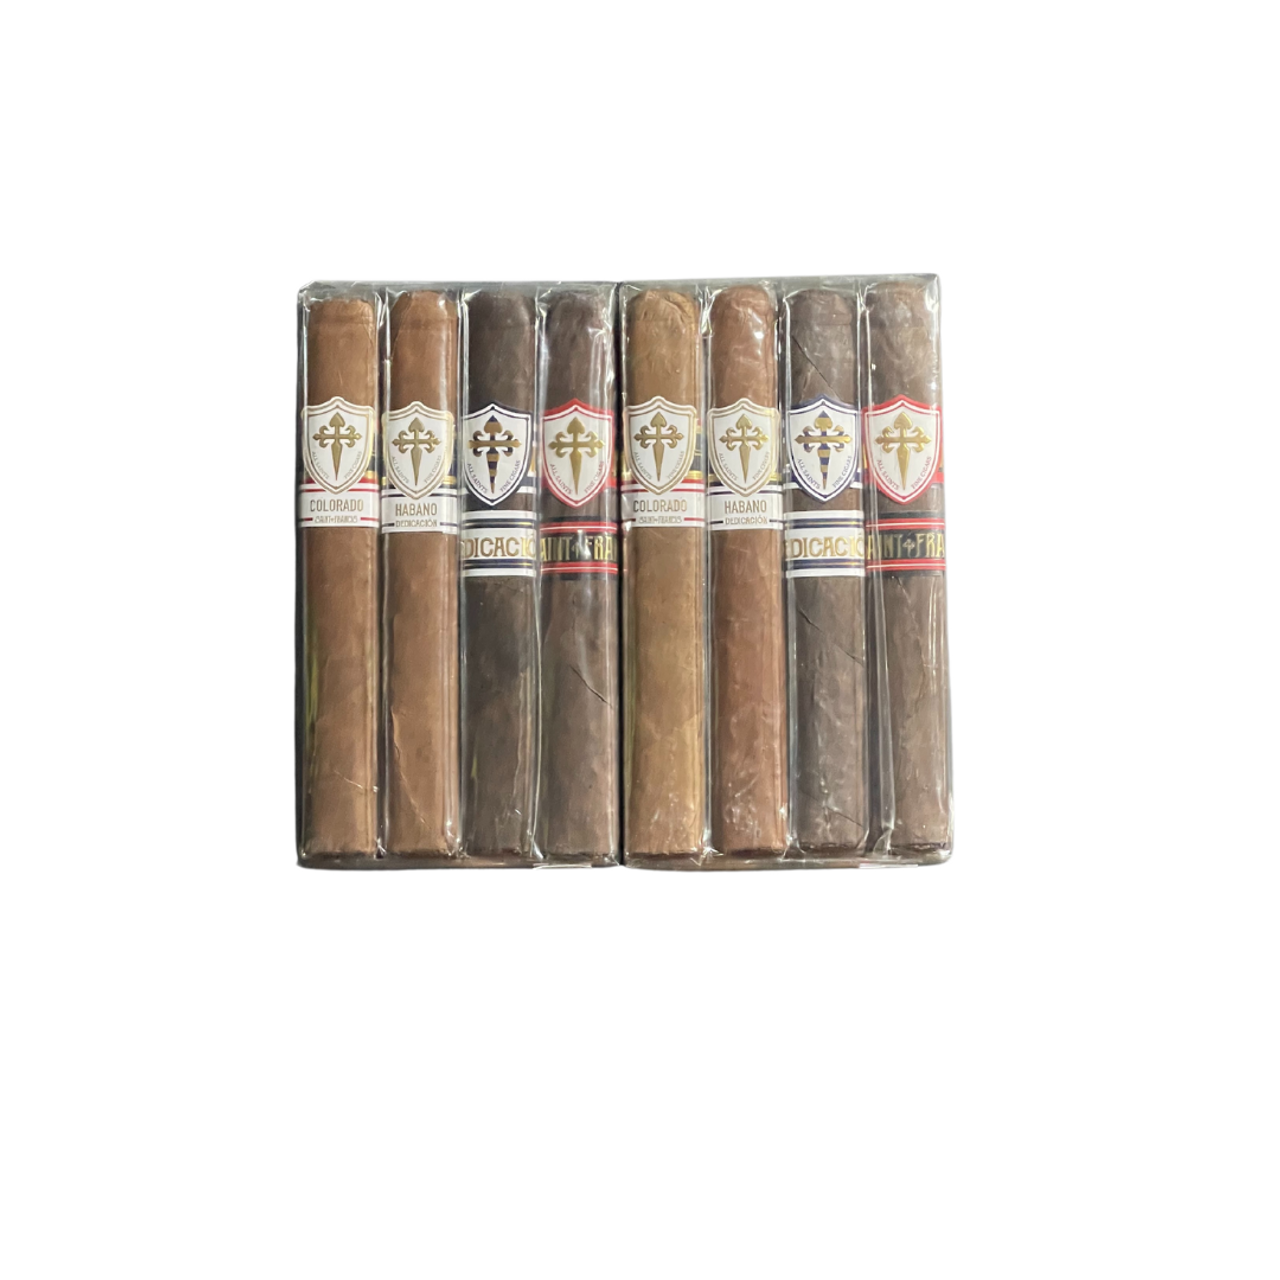 All Saints 8 Cigar Roubsto Sampler is priced to move at cigarsamplers.com friends! Free shipping is included!!!